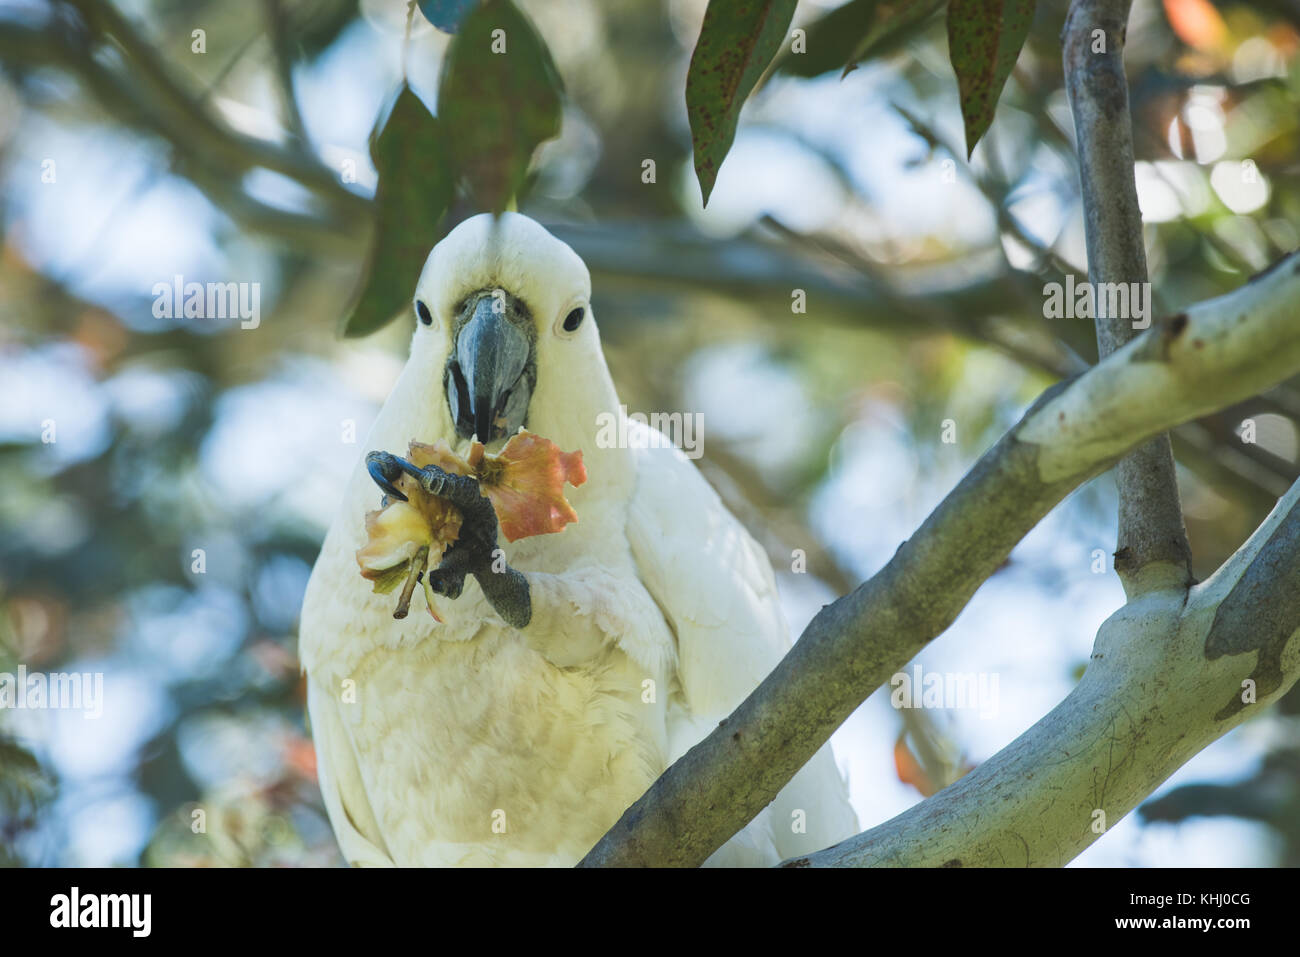 A white cockatoo in Australia perched up in a tree eating an apple core. Stock Photo